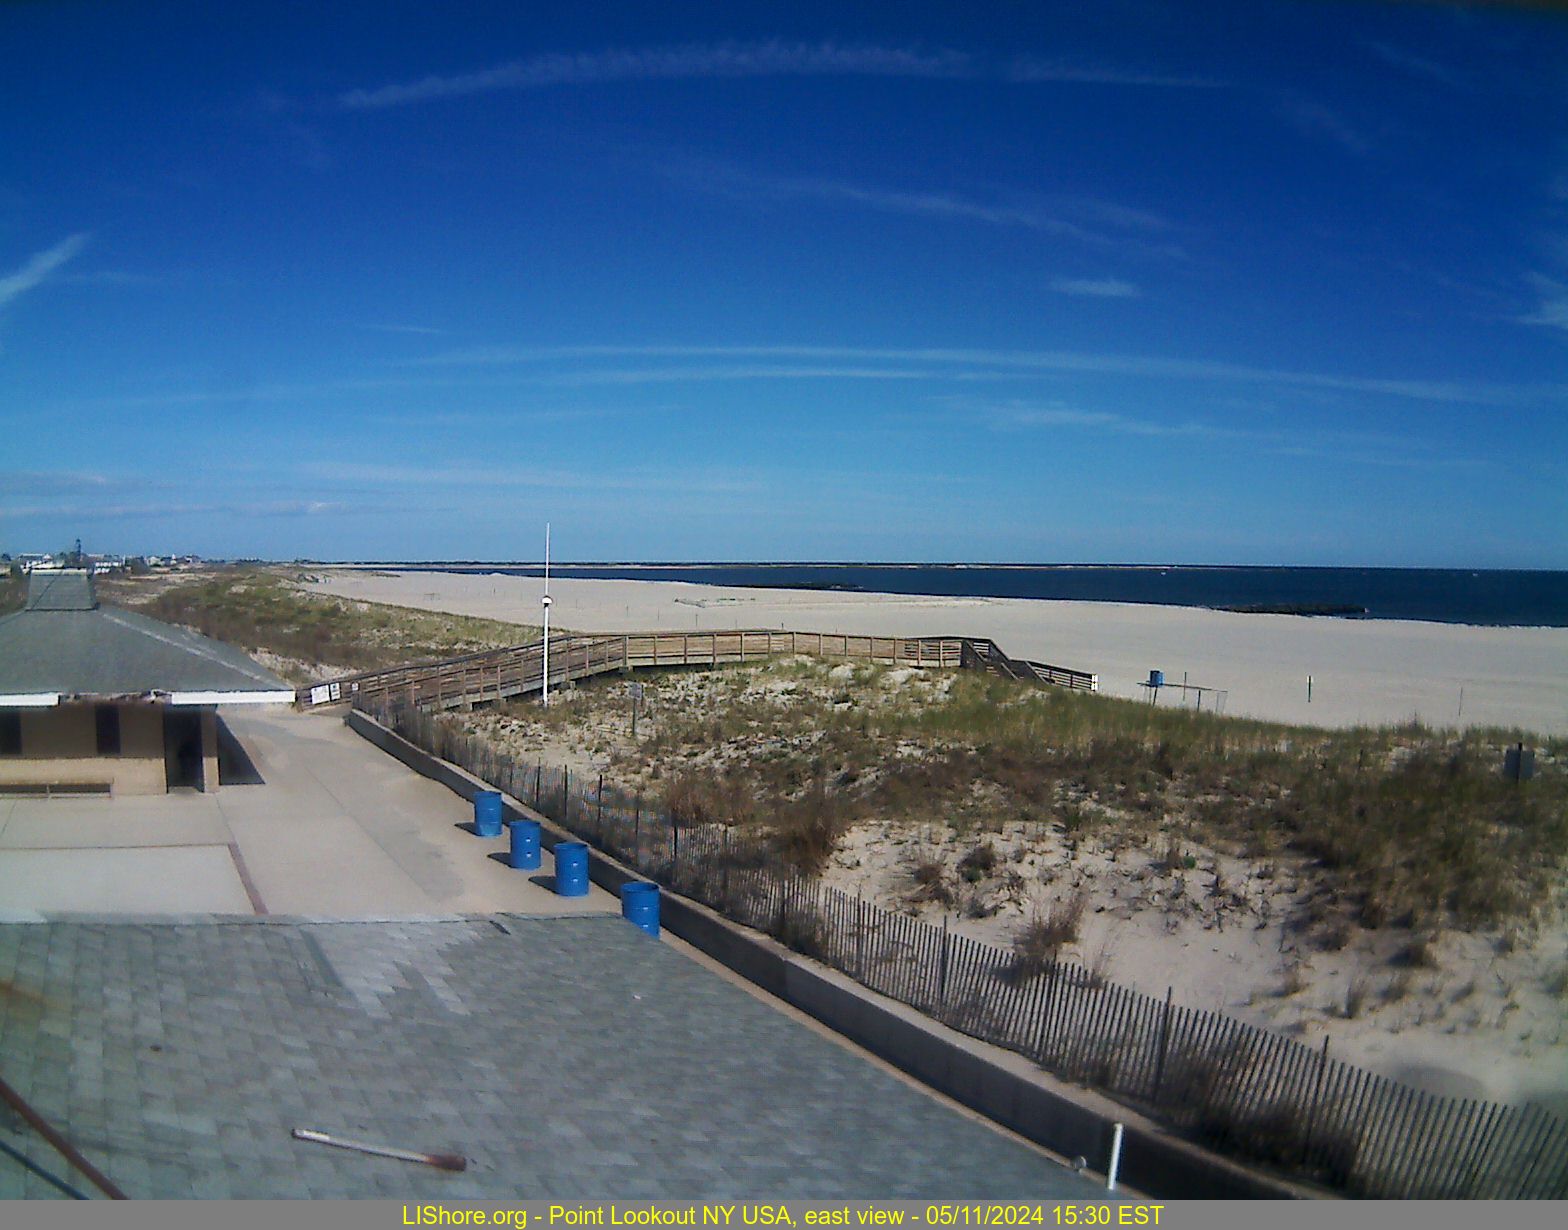 Point Lookout NY USA - new camera east view